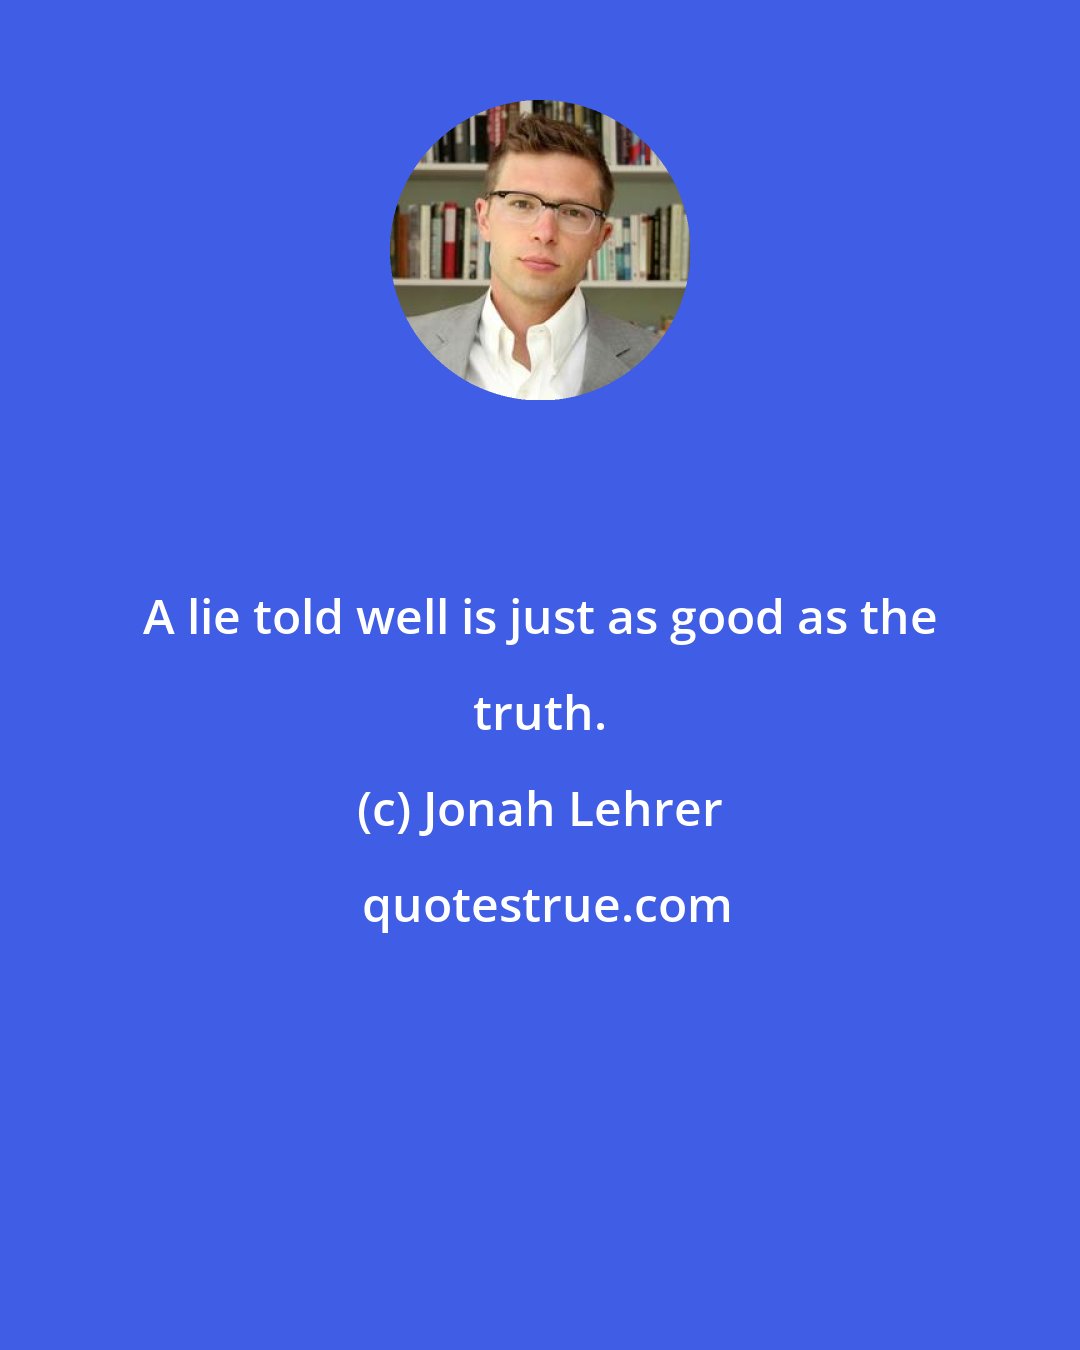 Jonah Lehrer: A lie told well is just as good as the truth.